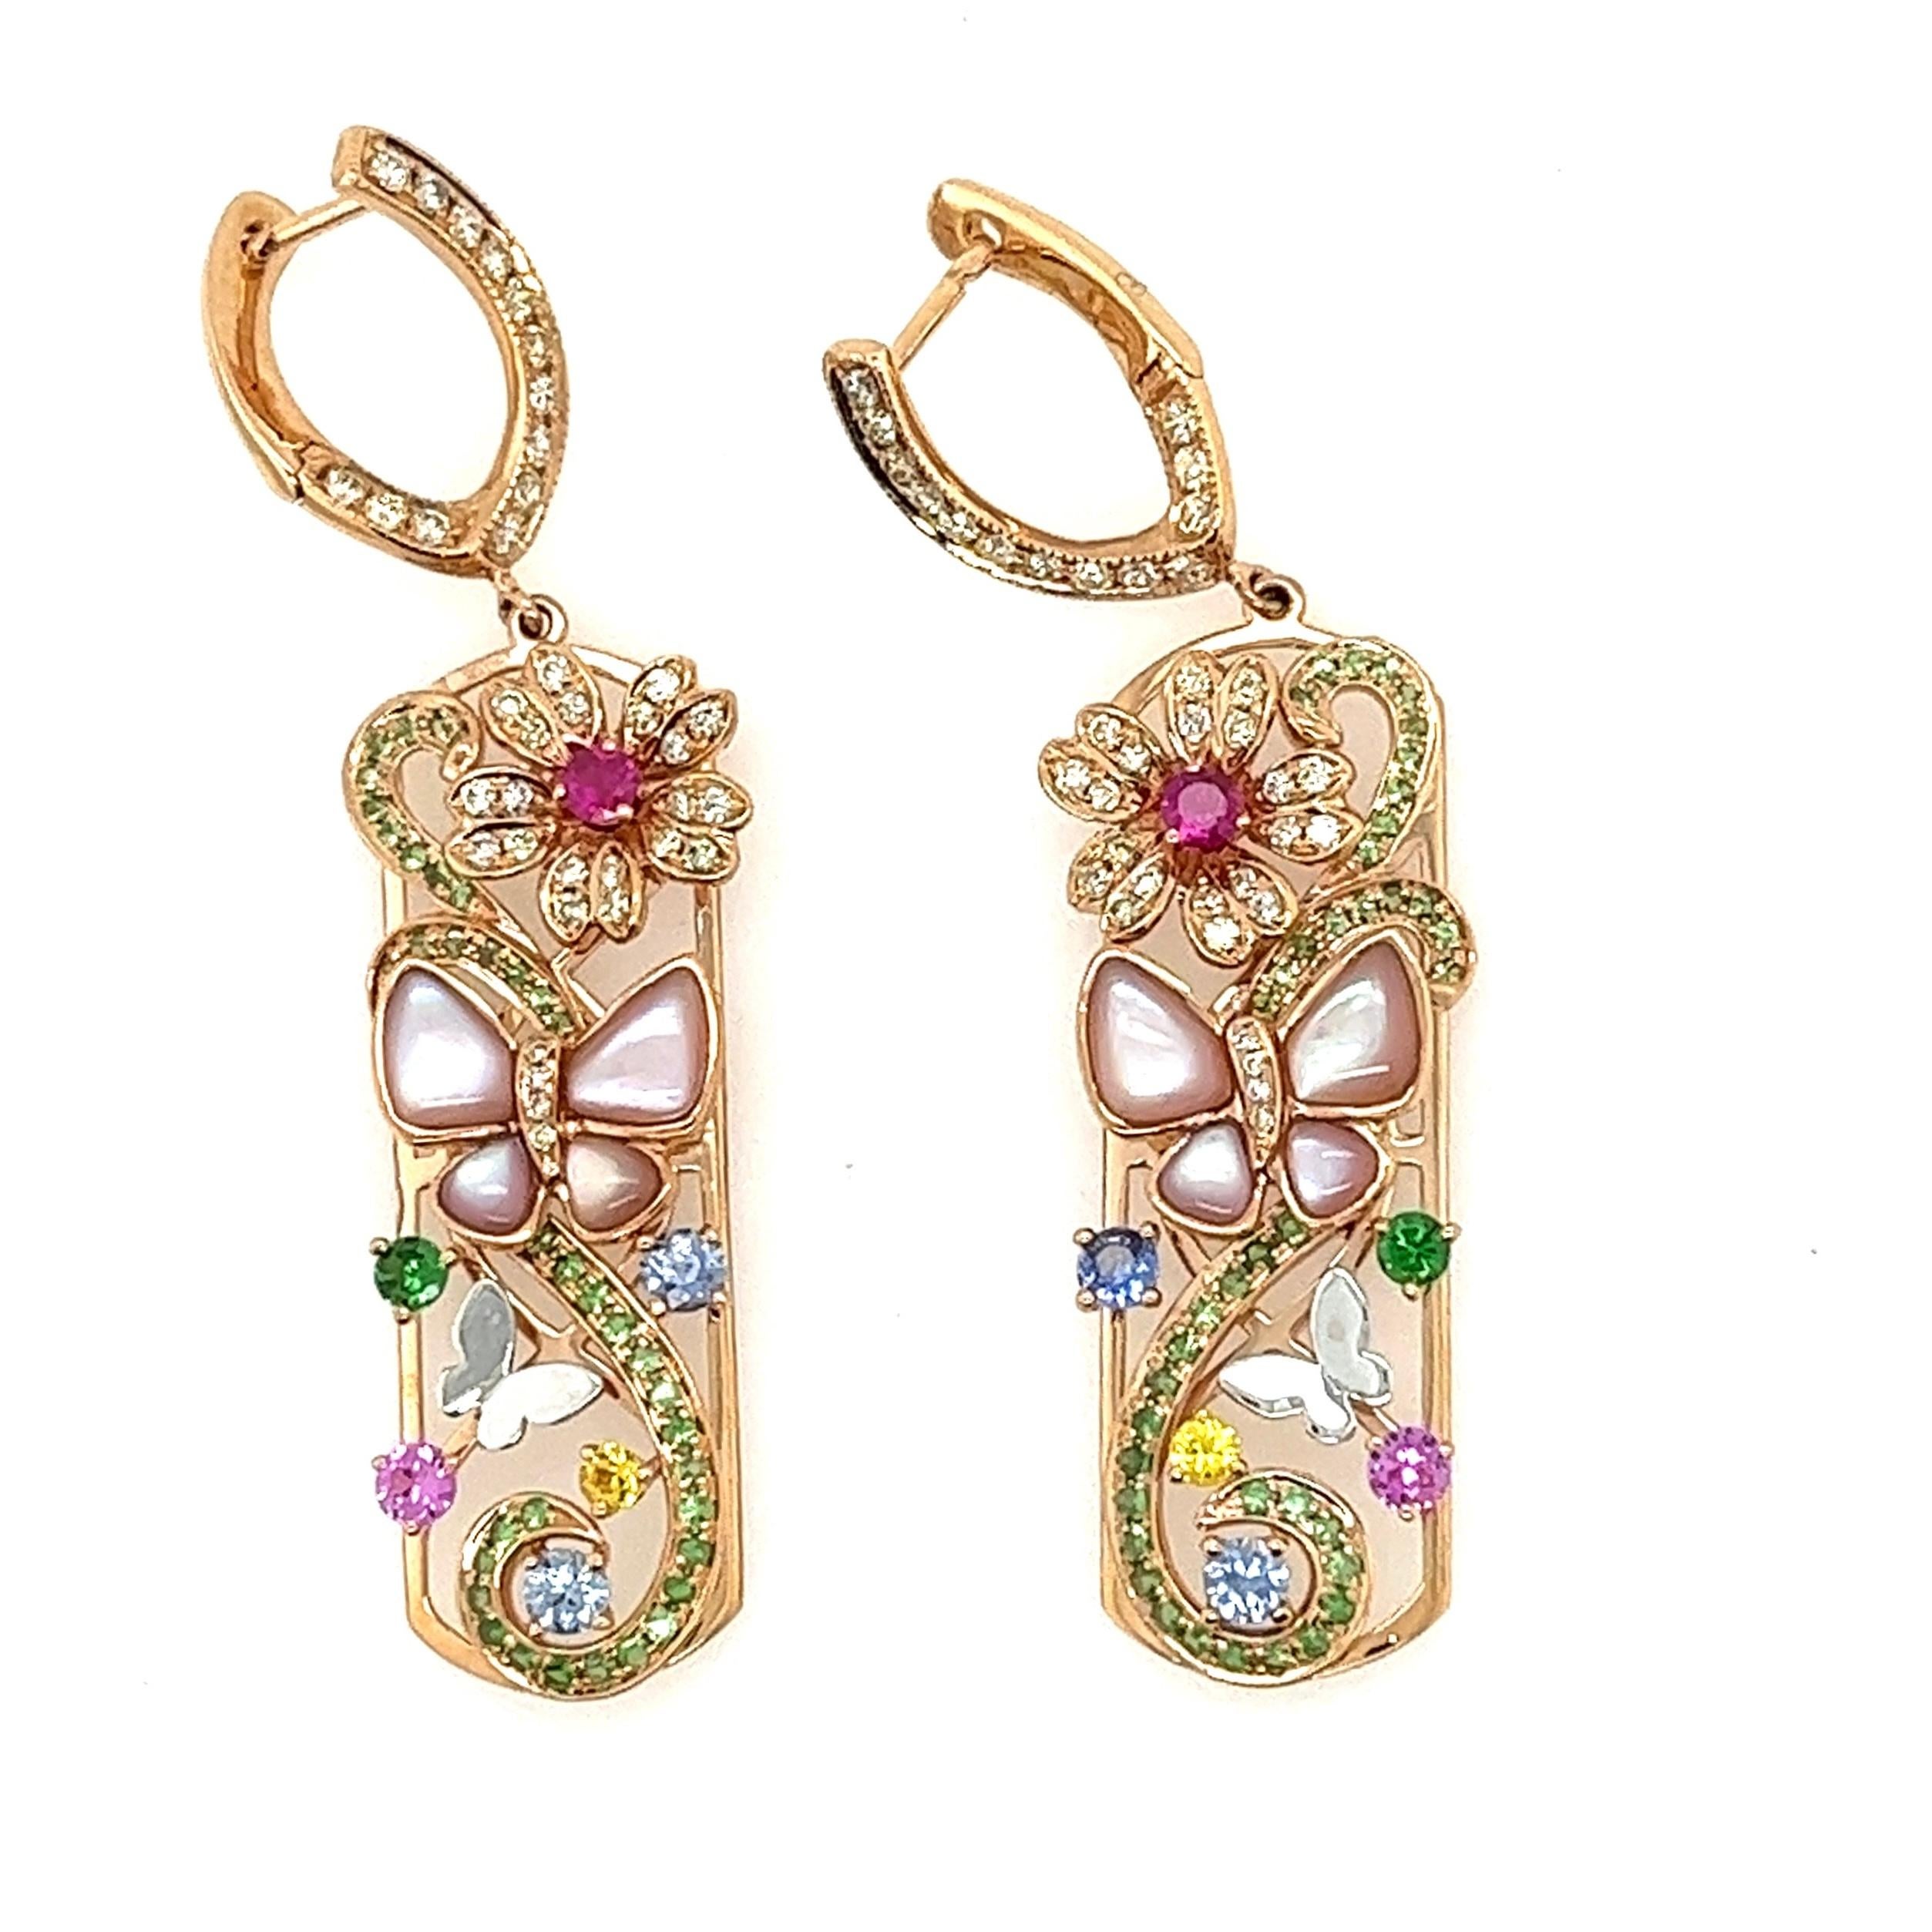 18K Rose Gold Multi-Colour Sapphire Garden Collection Earrings with Diamonds

4 Blue Sapphires - 0.52 CT
74 Diamonds - 0.79 CT
82 Green Garnets - 0.73 CT
8 Pearls - 1.90 CT
4 Pink Sapphires/Rubies - 0.42 CT
2 Yellow Sapphires - 0.13 CT

These 18K